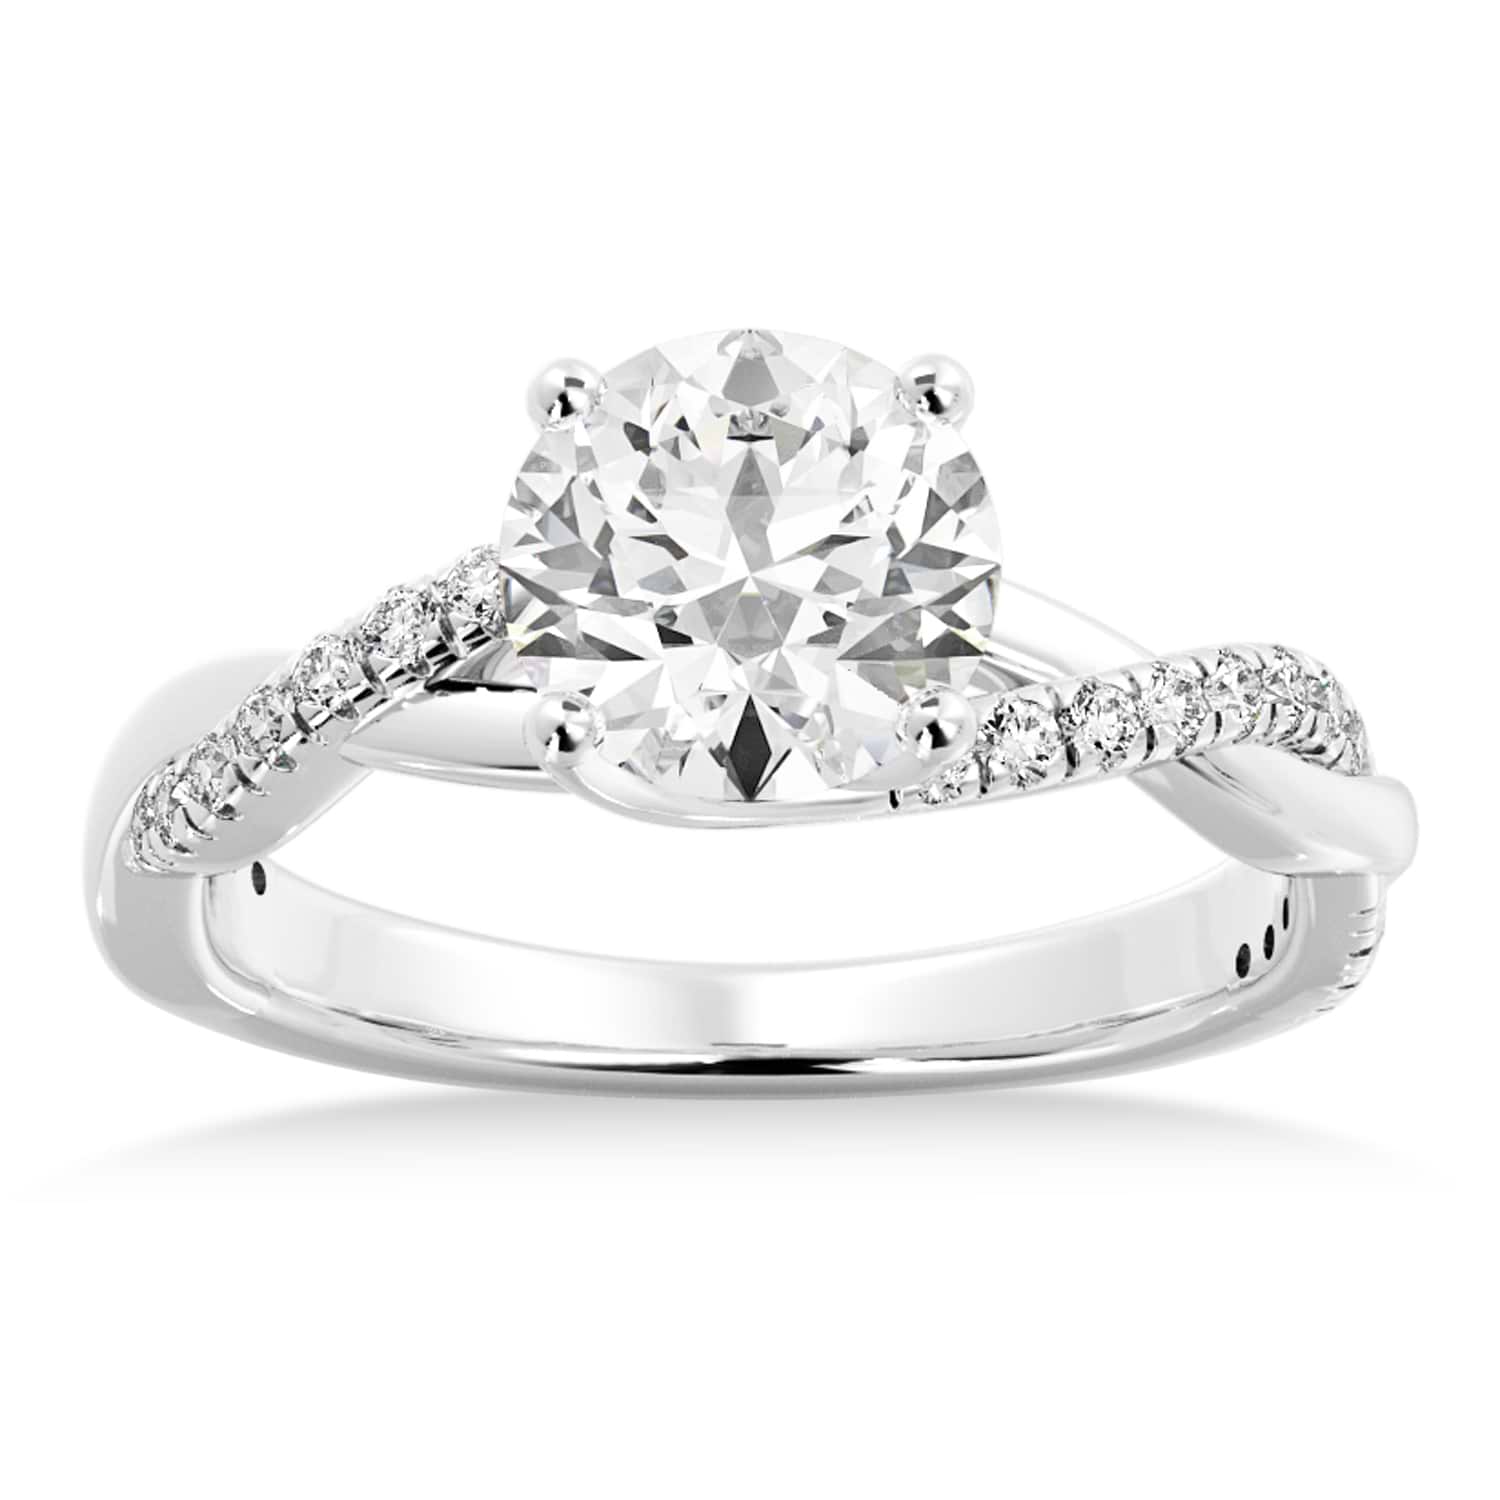 Twisted Diamond Engagement Ring14k White Gold (0.16ct)